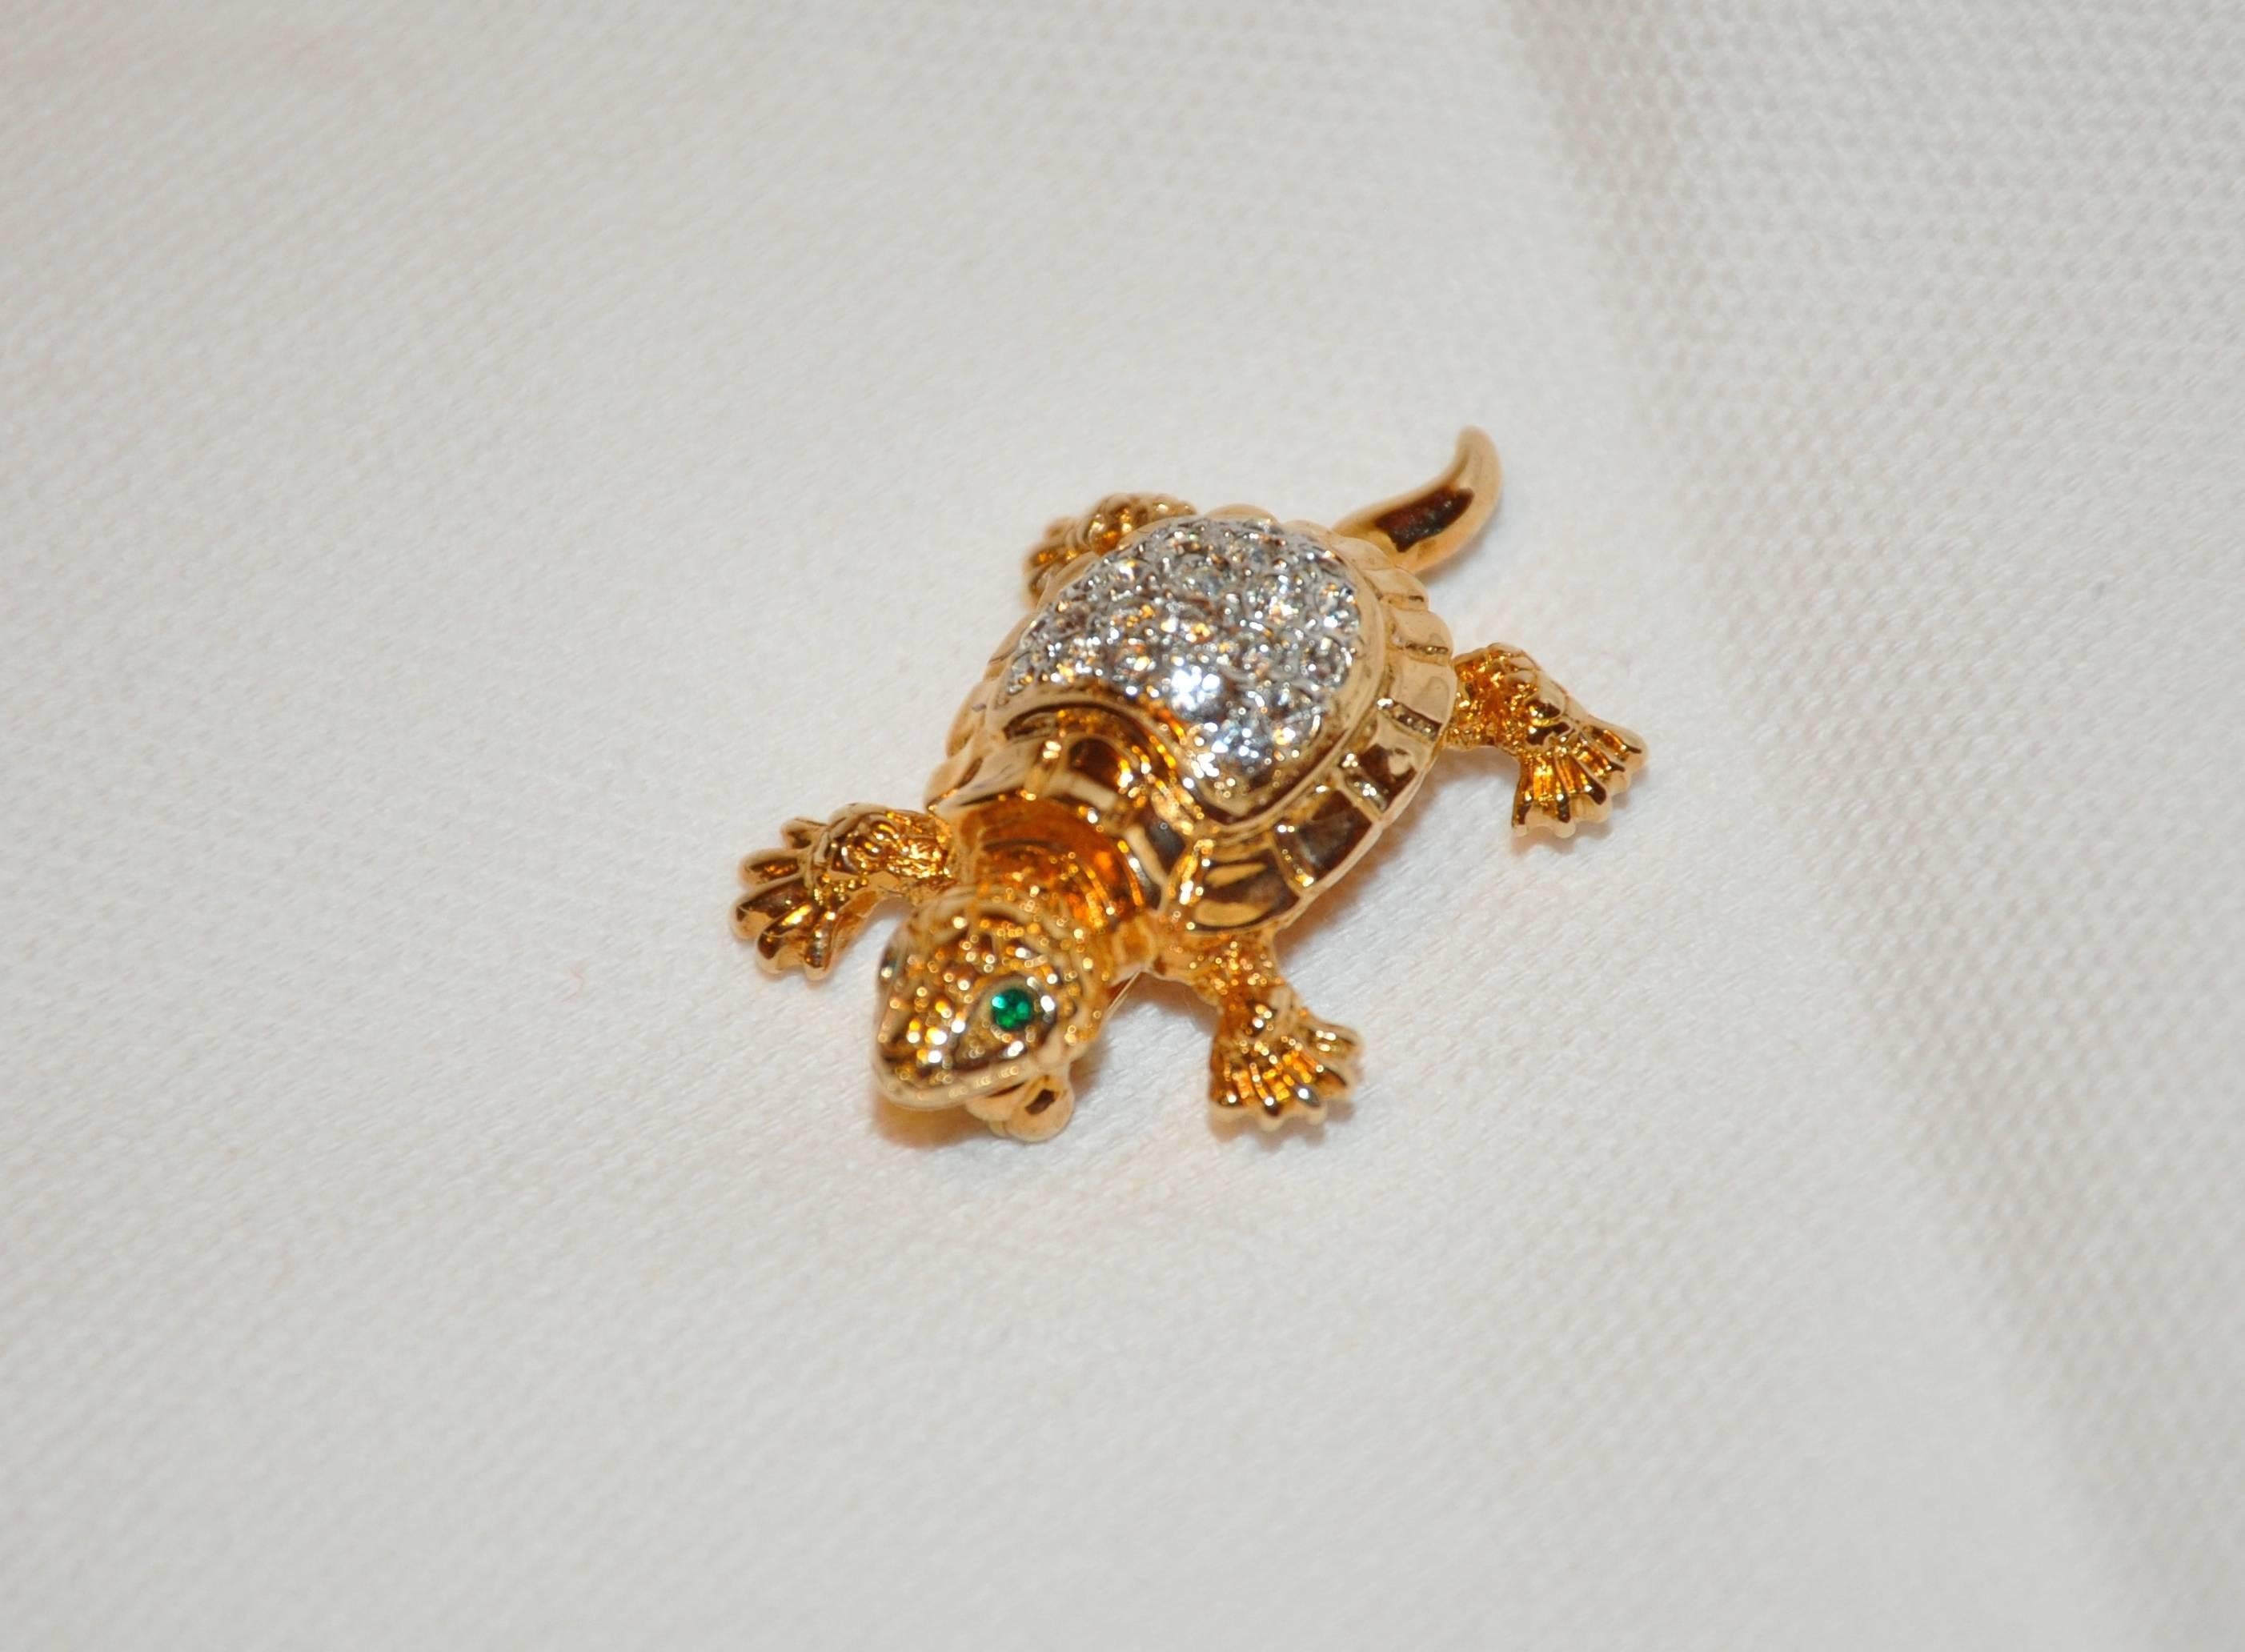      Van Dell wonderfully detailed "Turtle" in gilded gold vermeil hardware accented with faux diamonds and faux emeralds brooch measures 1 1/4 inches, width is 1 inch, depth is 1/2 inch, made in the US.